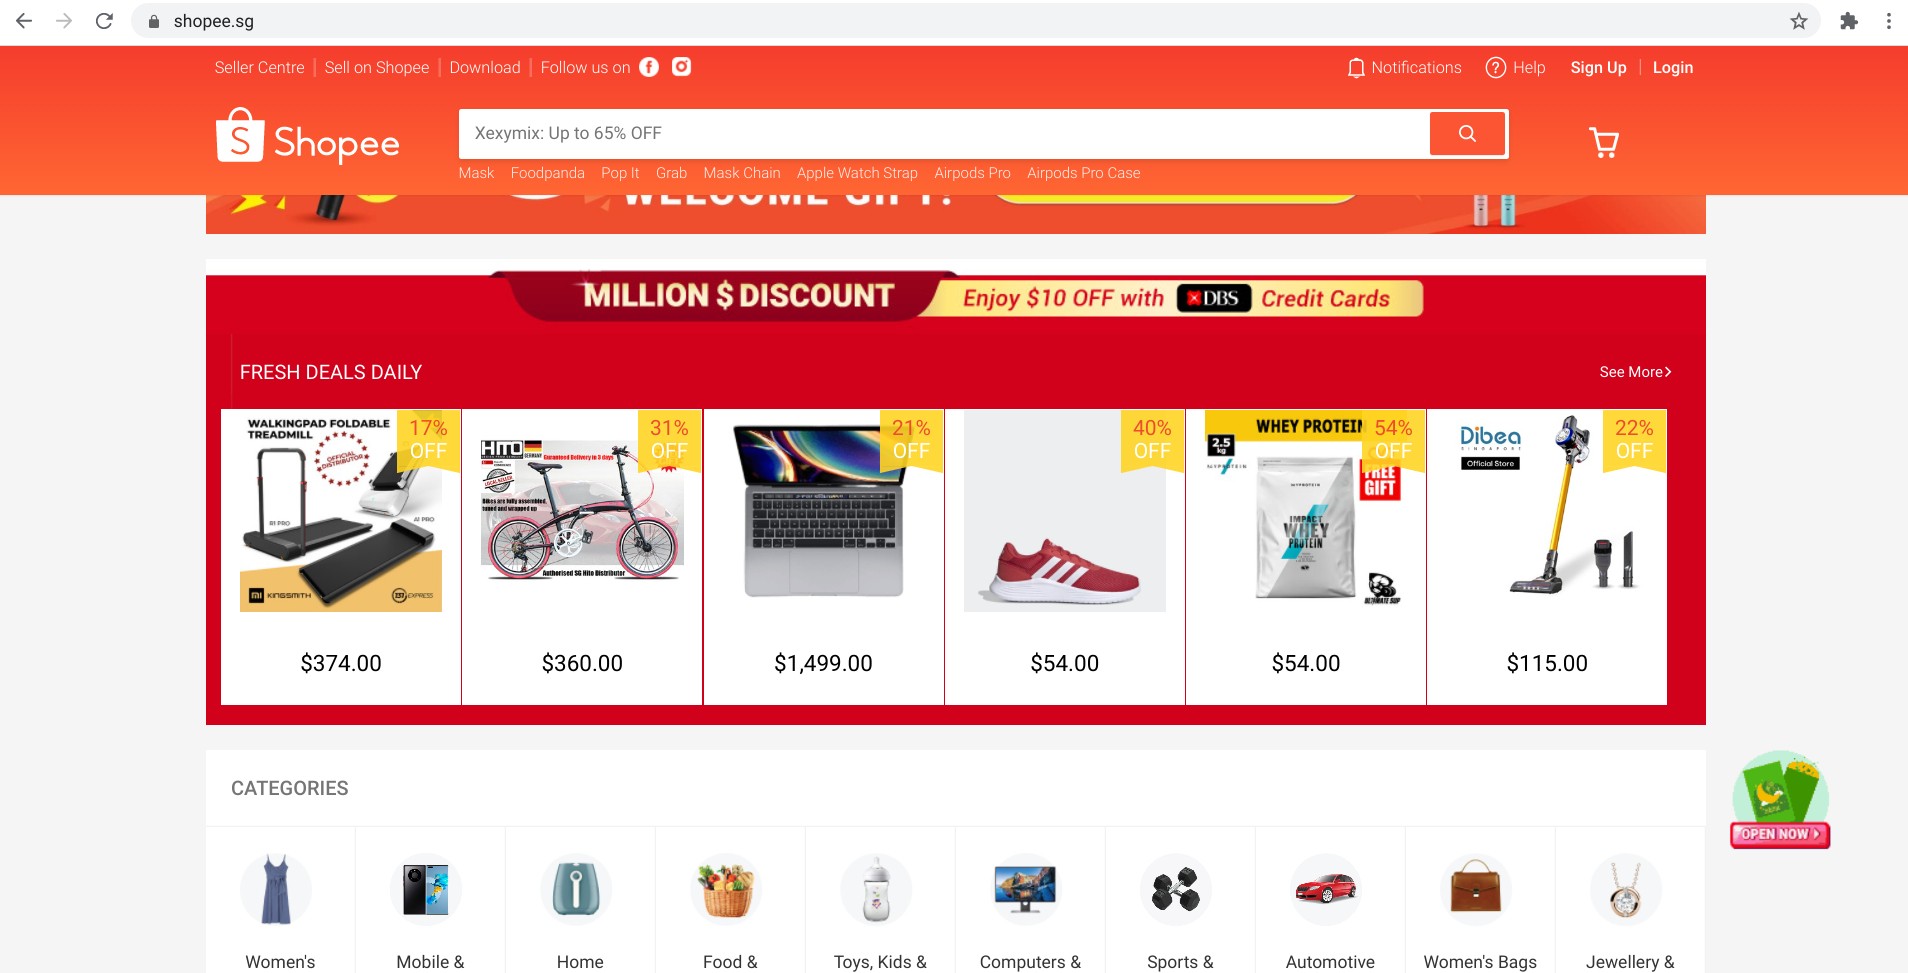 Screenshot: daily deals and discounts on Shopee.sg